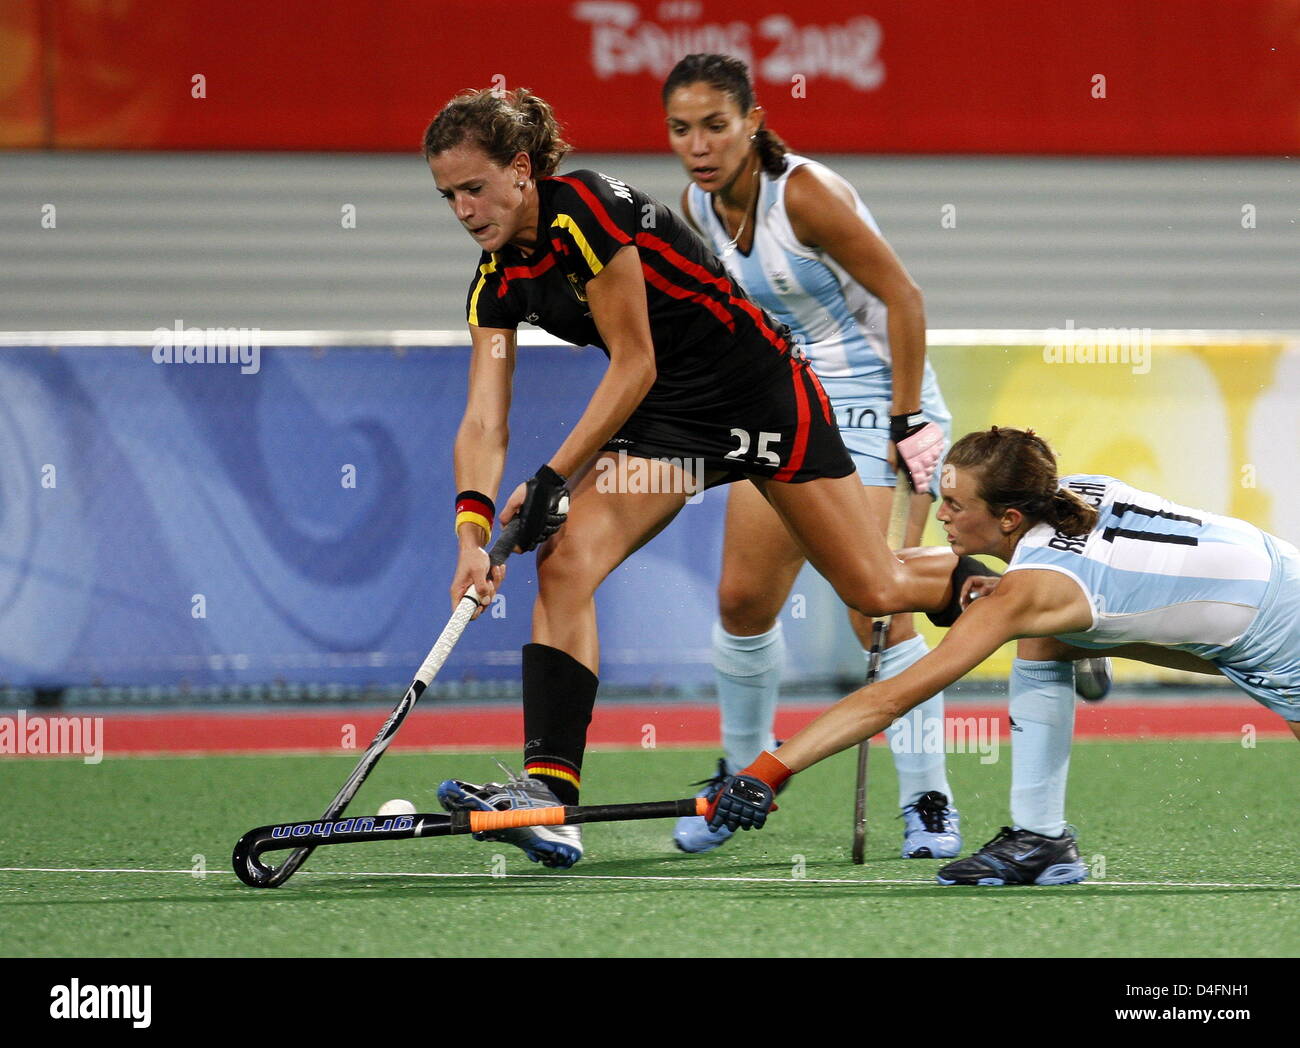 Janne Mueller-Wieland (L) of Germany vies with Agustina Gonzalez (C) and Carla Rebecchi (R) of Argentina during the womenÒs hockey preliminary match W21 between Germany and Argentina competition at the Beijing 2008 Olympic Games, Beijing, China, 16 August 2008. Photo: Marcus Brandt dpa ###dpa### Stock Photo